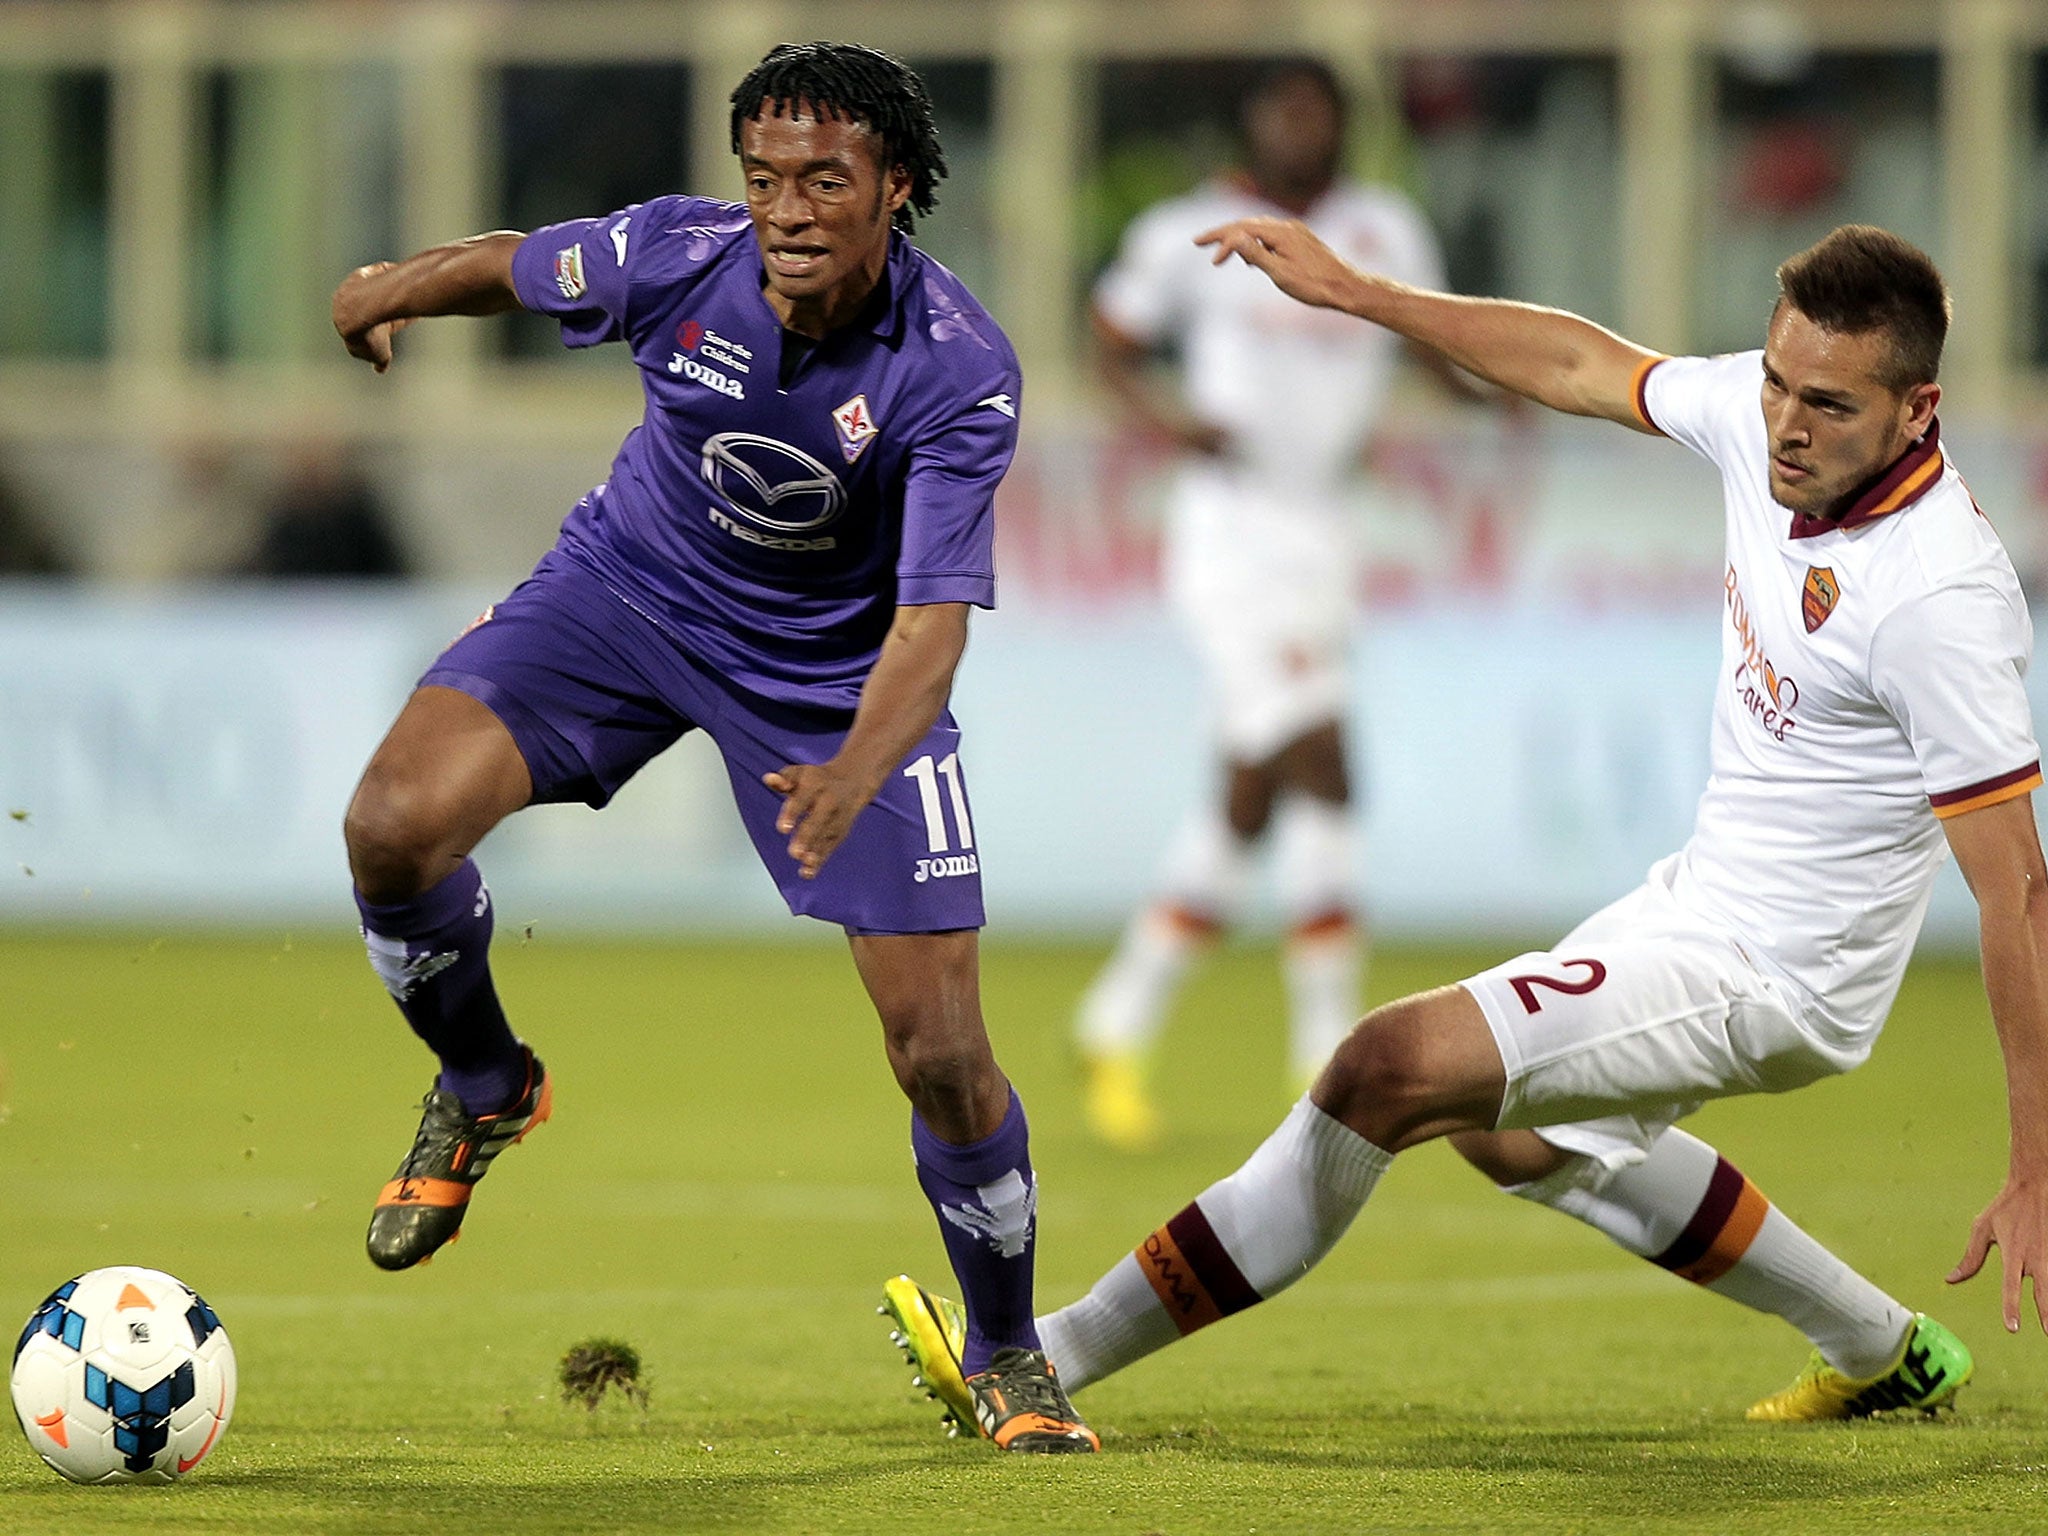 Cuadrado is a late bloomer but has been excellent for Fiorentina in the last two seasons